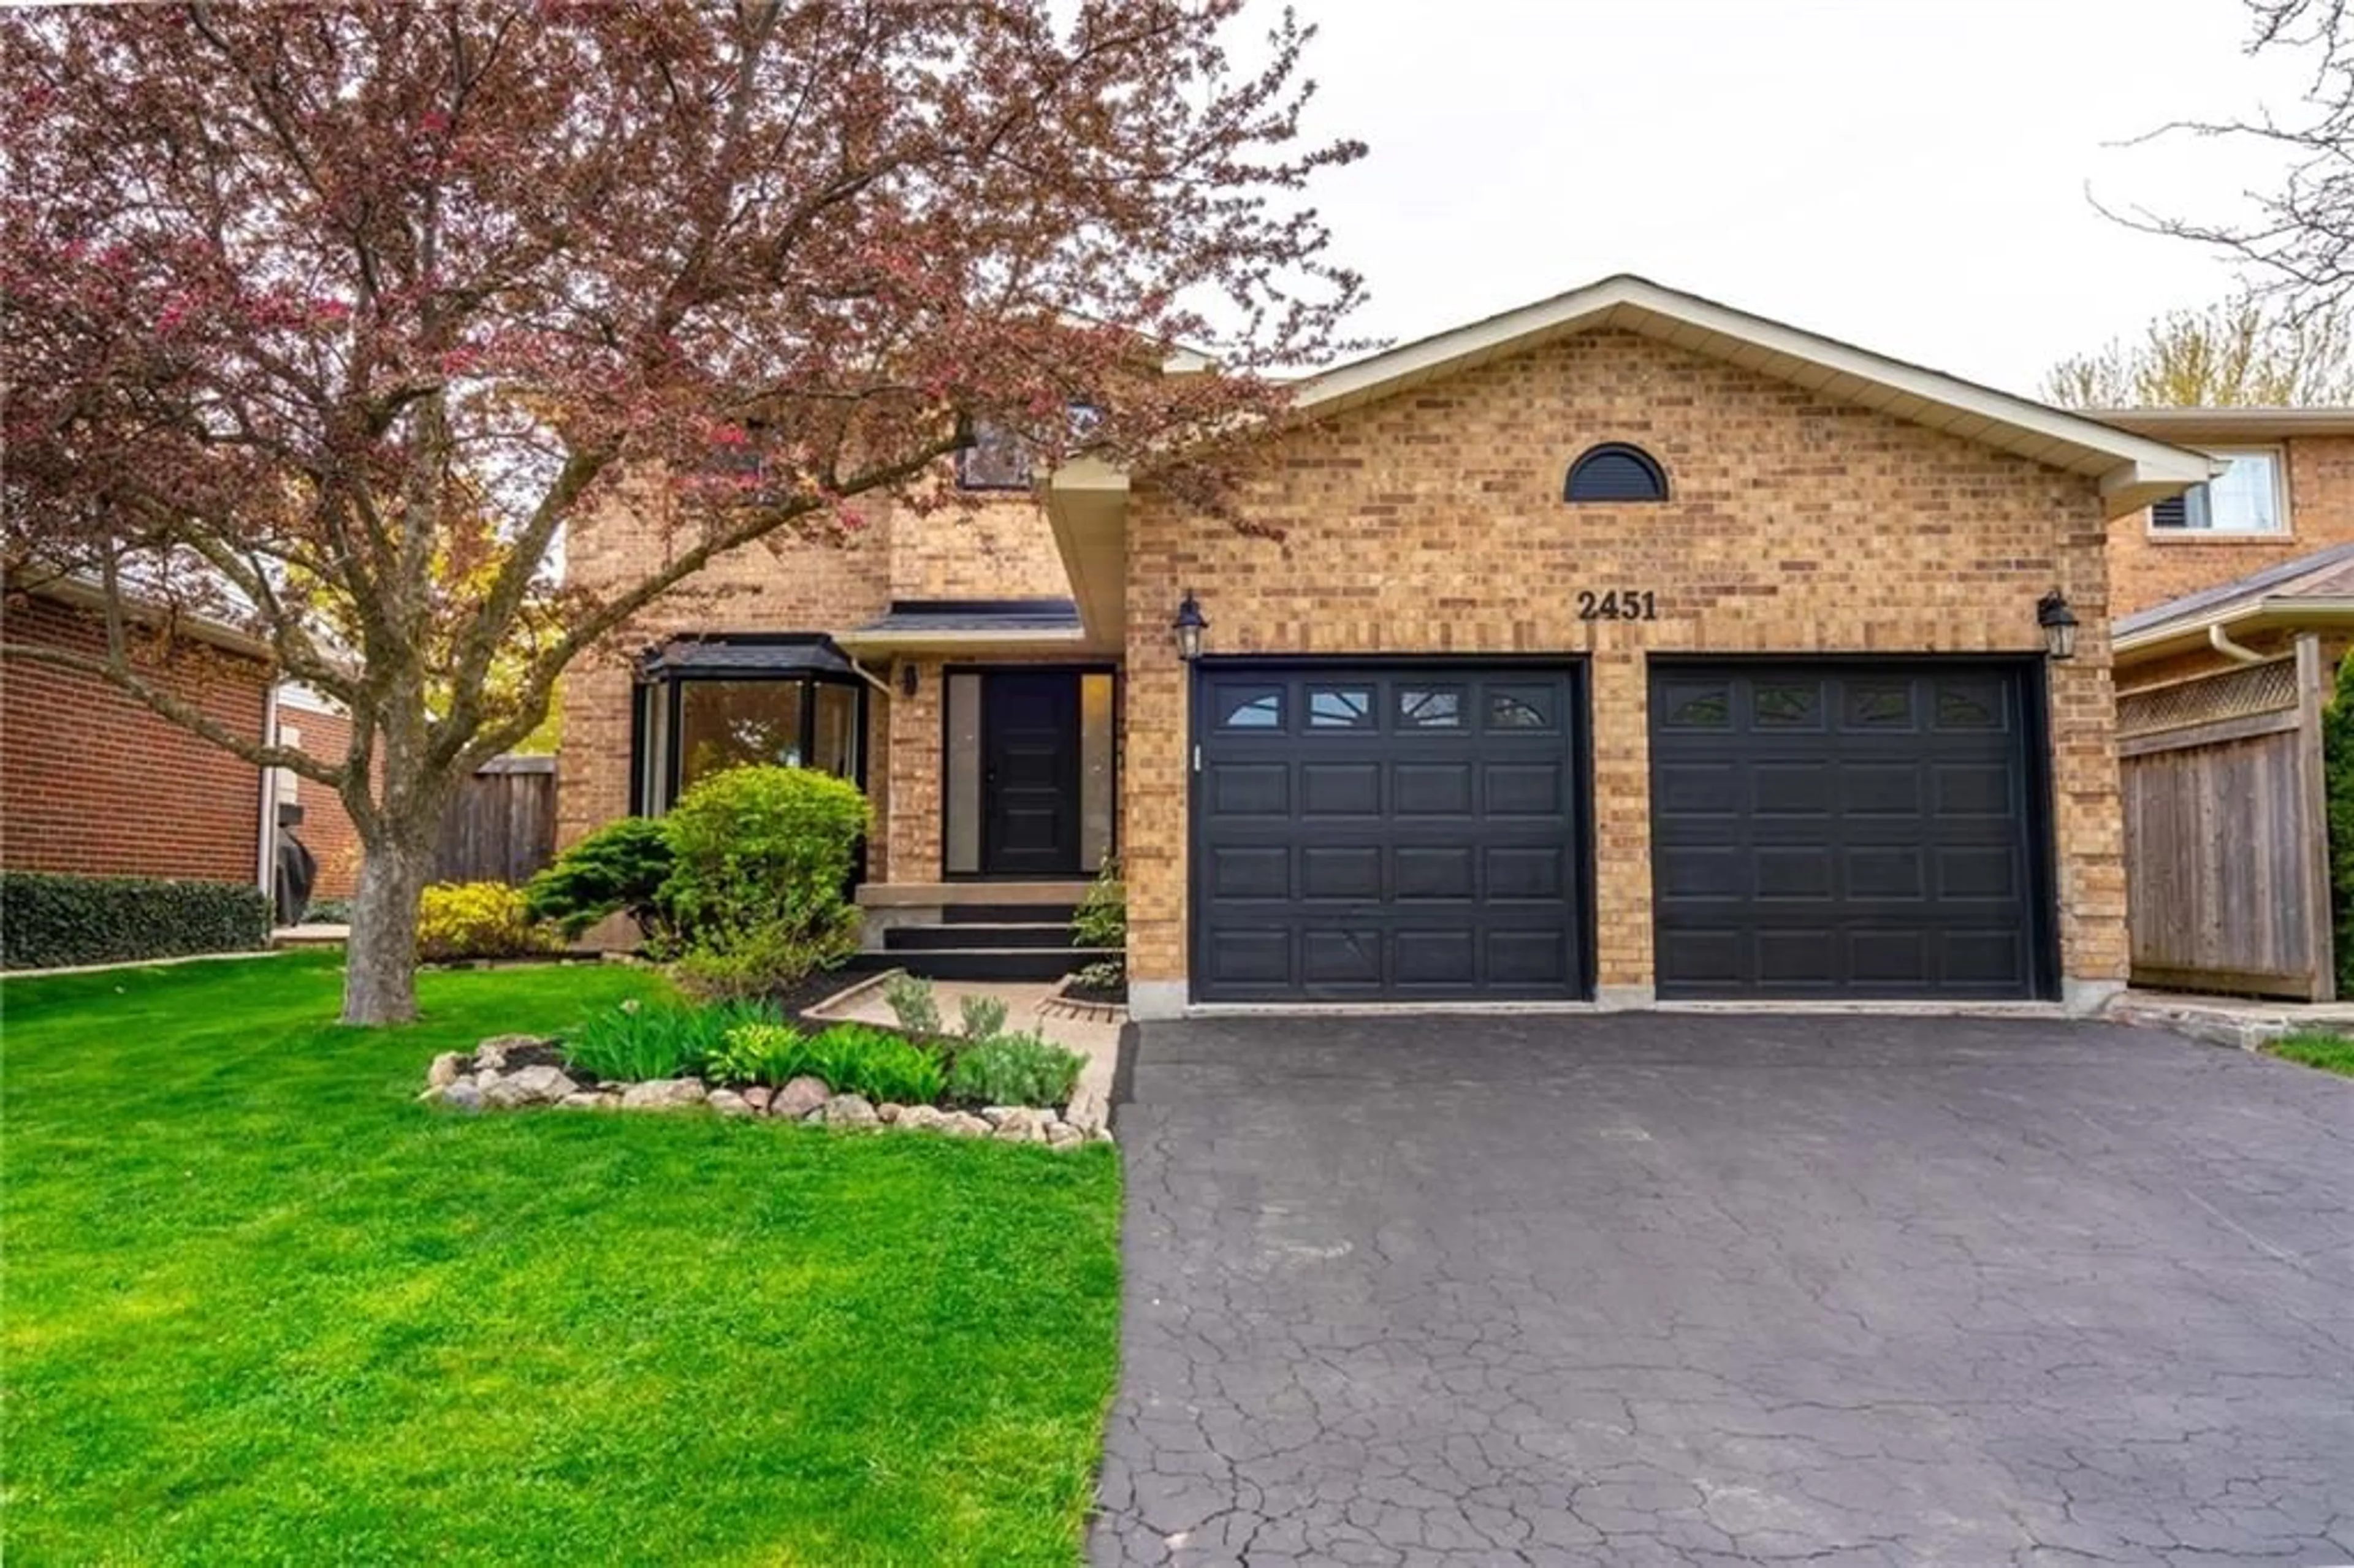 Home with brick exterior material for 2451 Overton Dr, Burlington Ontario L7P 4B6